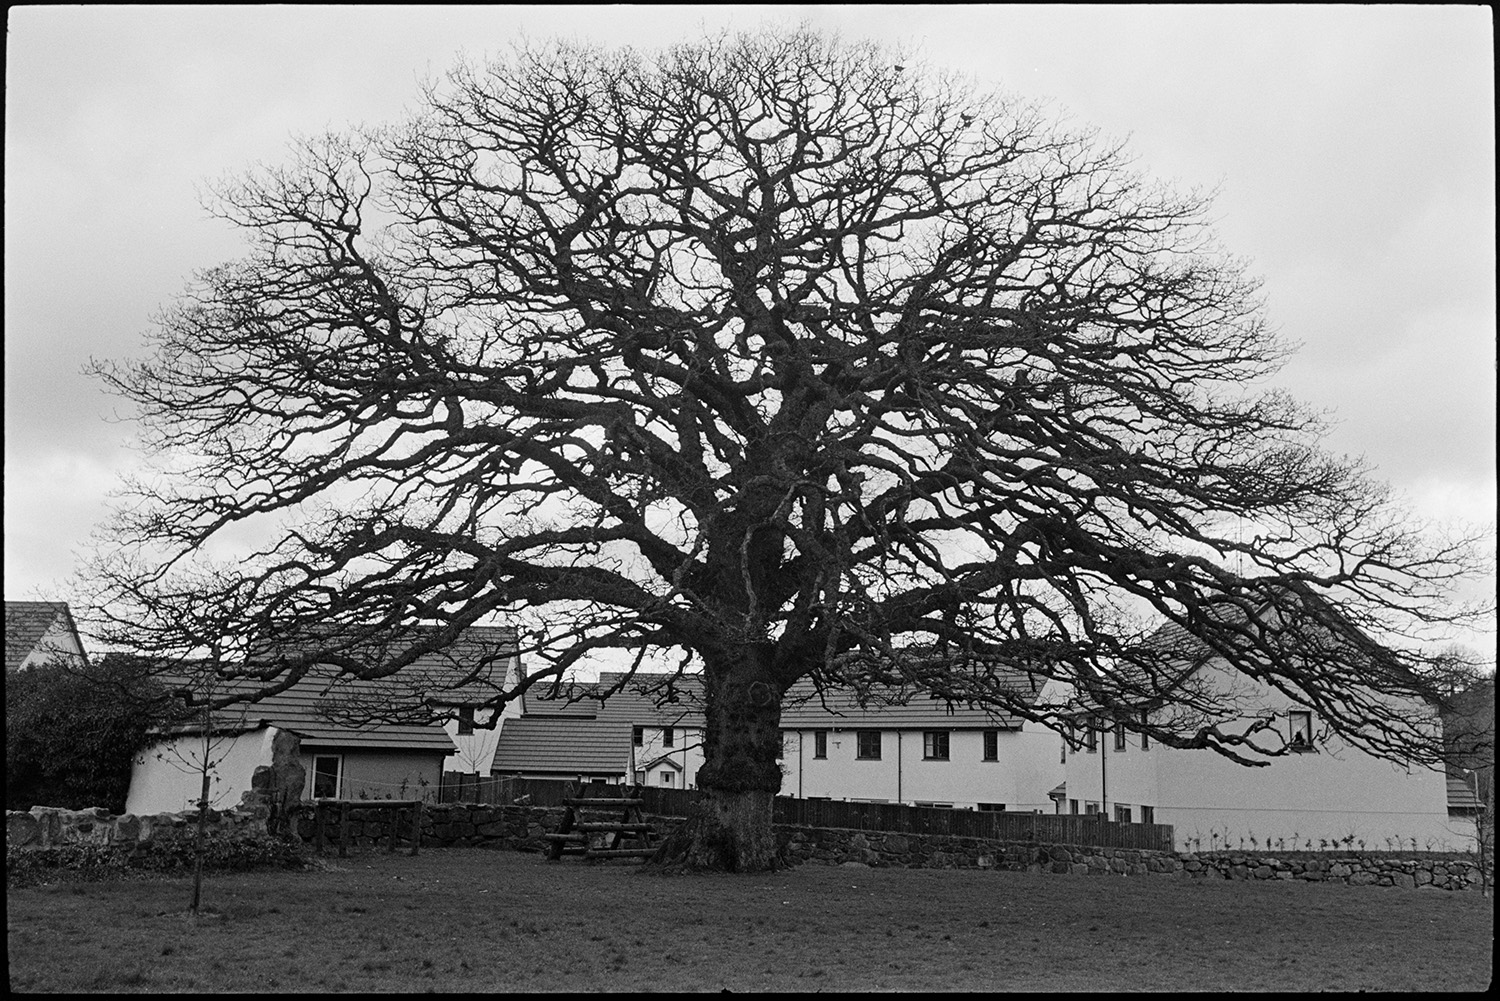 Large oak tree in village.
[A large oak tree at Sticklepath, in front of a group of modern houses. A climbing frame made from logs is next to the oak tree.]